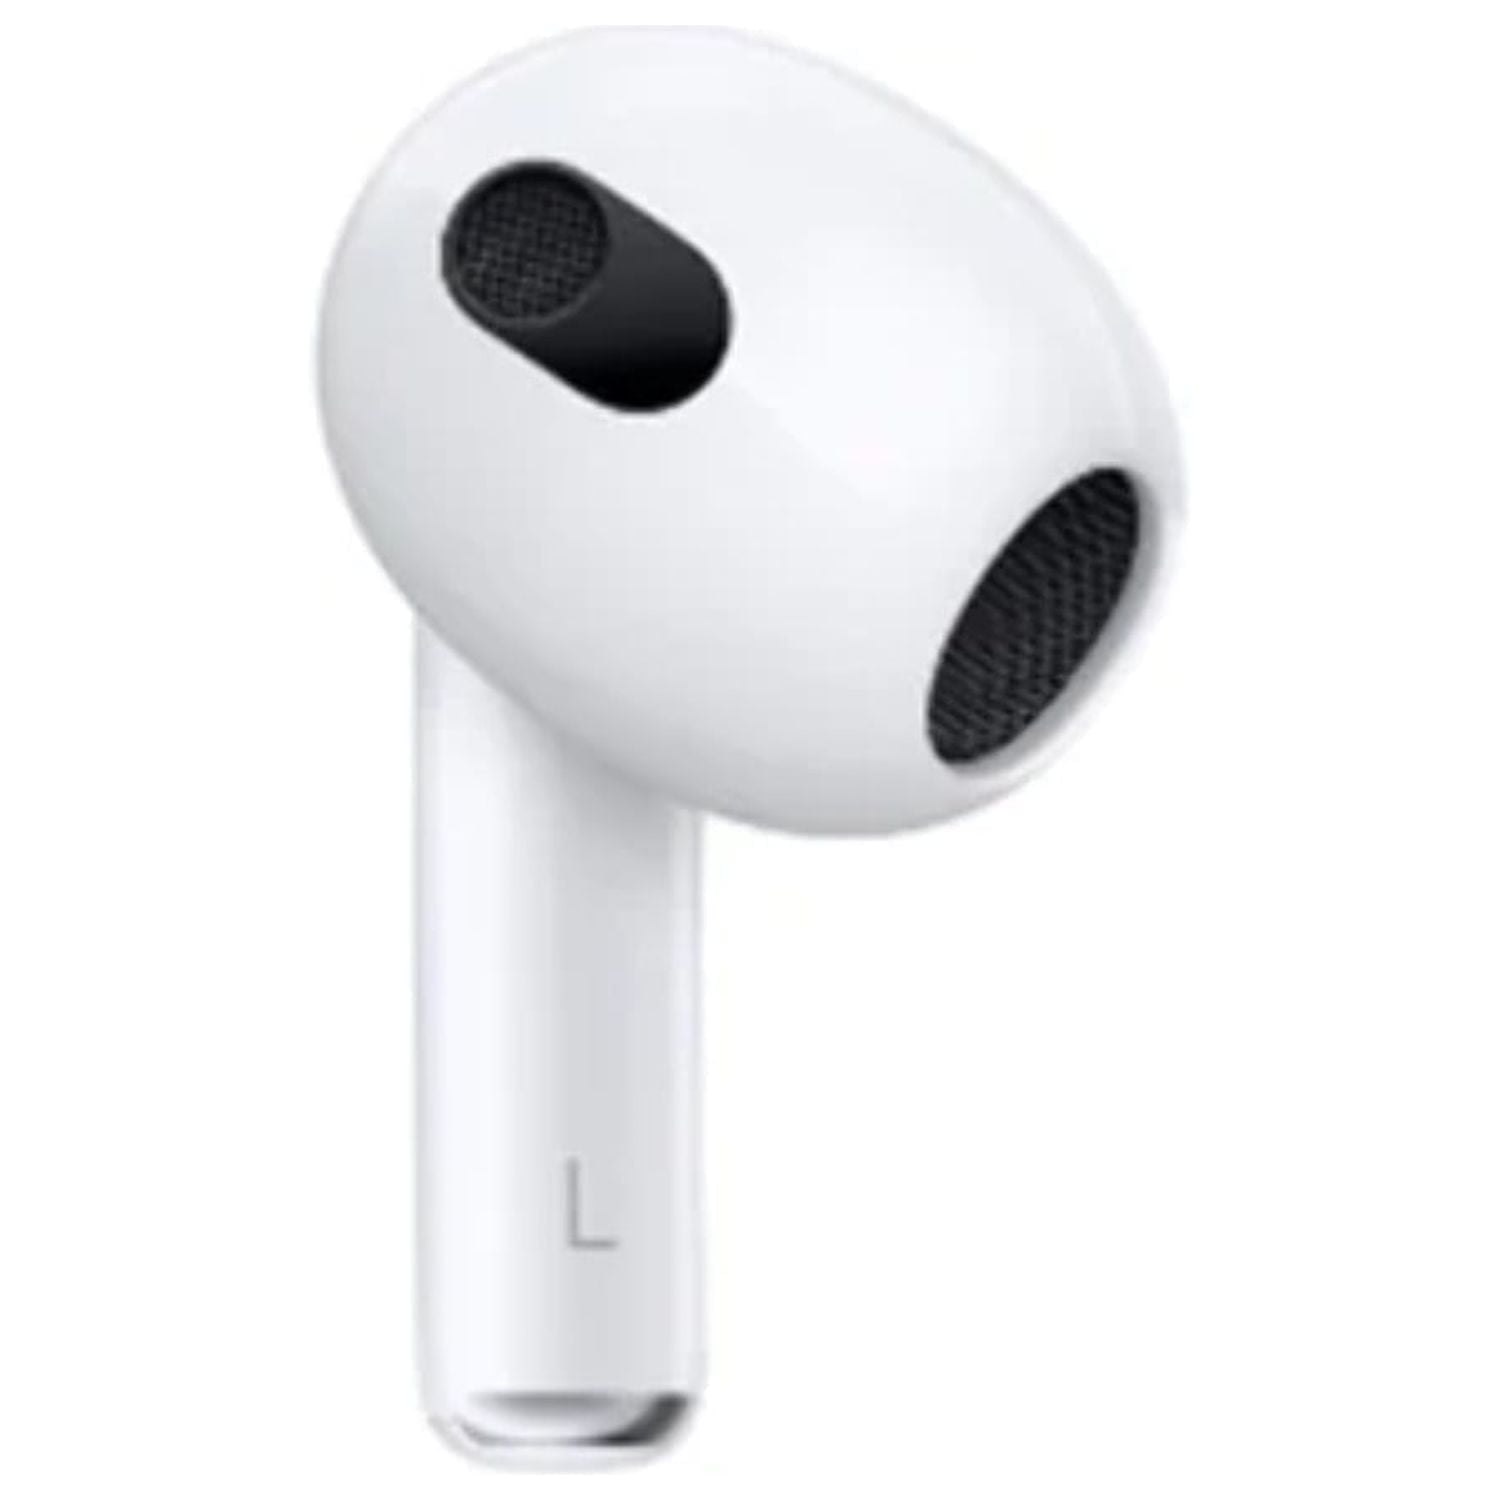 Apple AirPods with Charging Case (2nd Generation) - Walmart.com